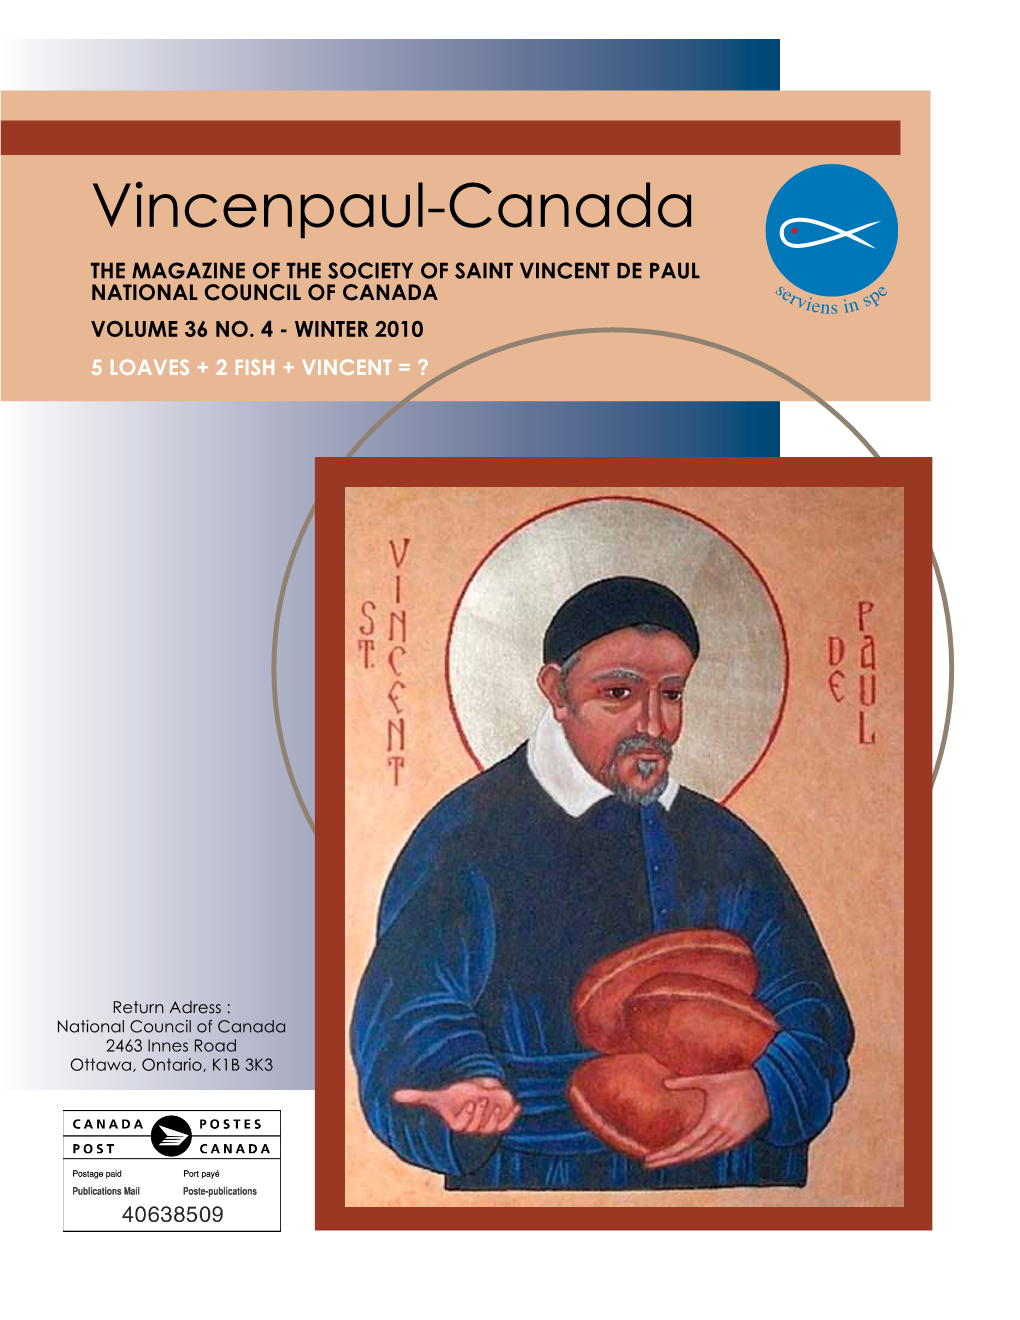 Vincenpaul-Canada the Magazine of the Society of Saint Vincent De Paul National Council of Canada Volume 36 No